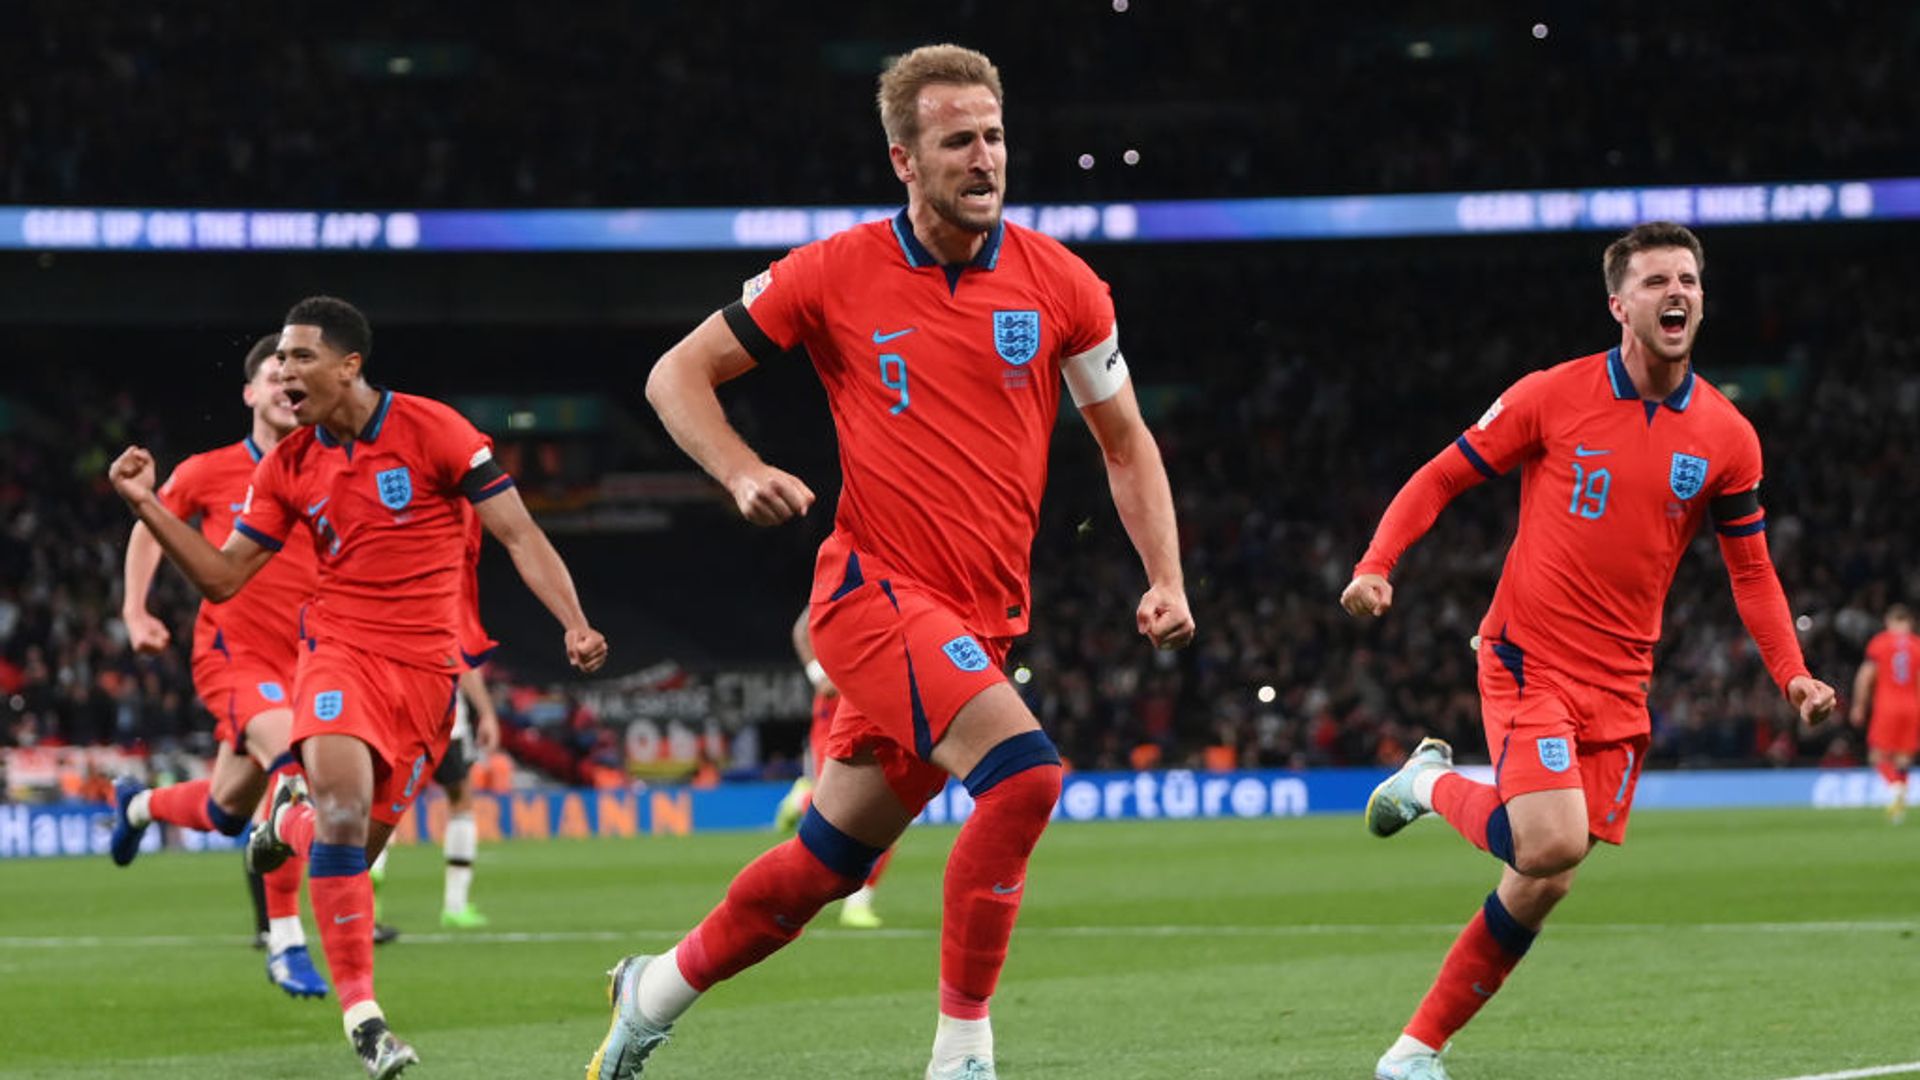 Better? Or still worried? Your views on England's final game before World Cup